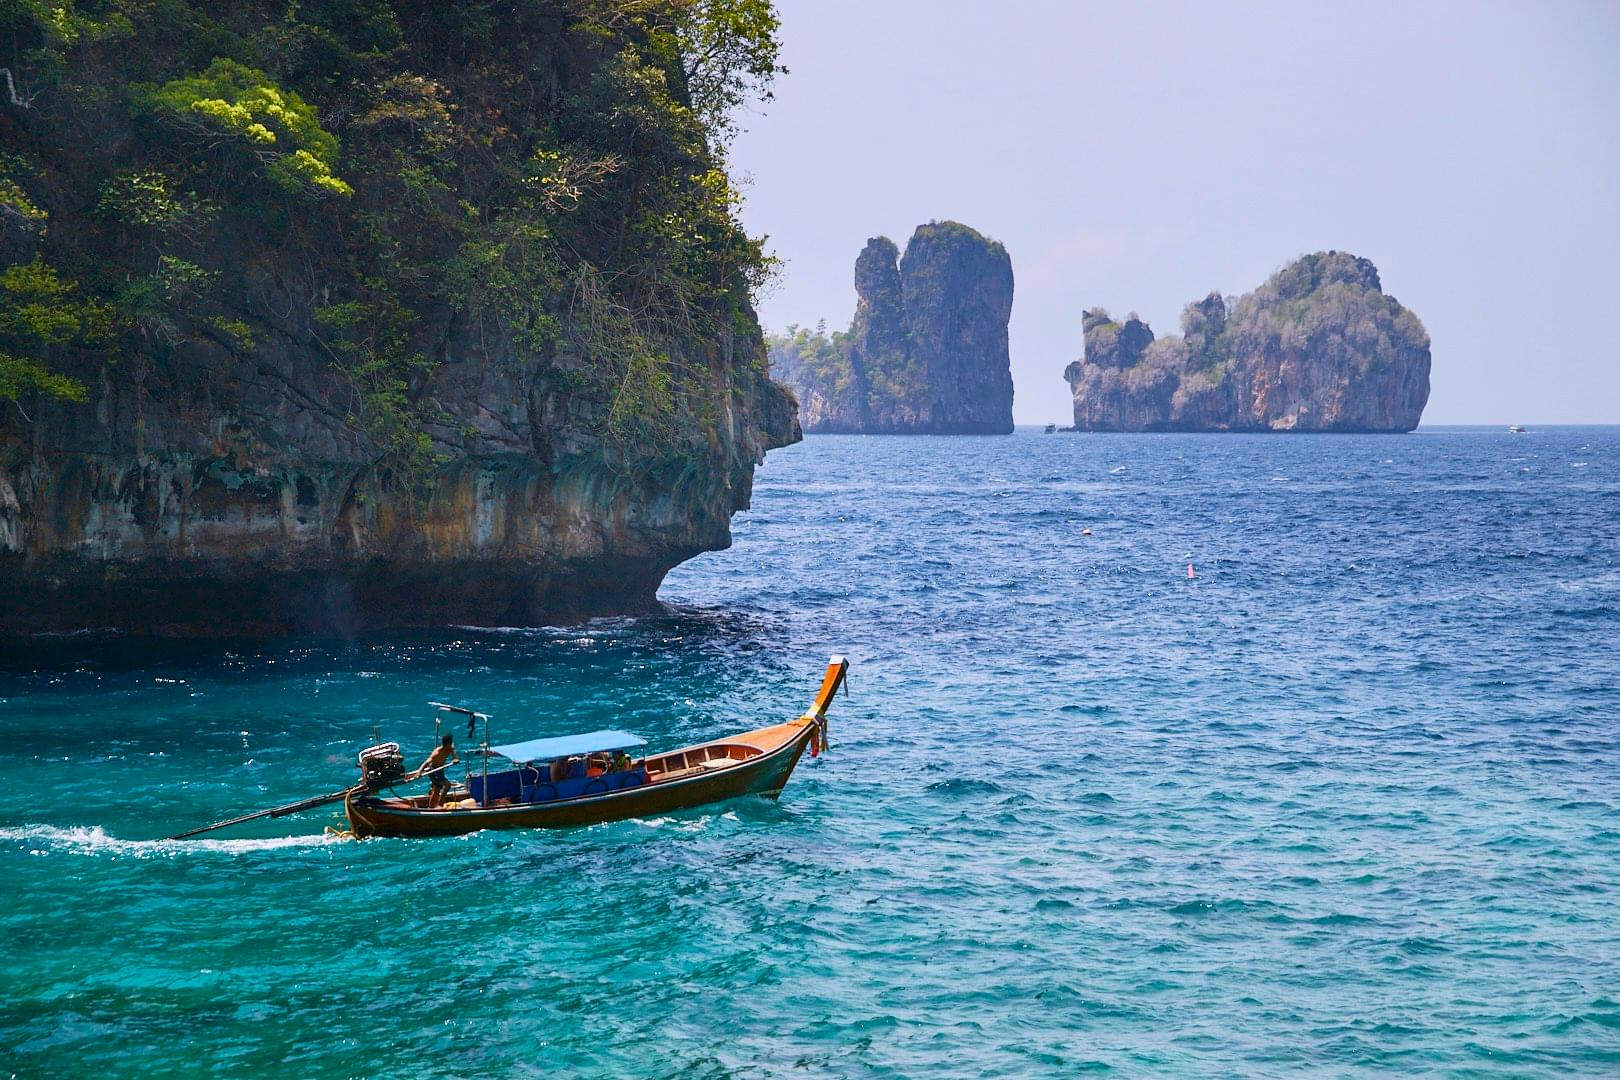 Things to Do in Phi Phi